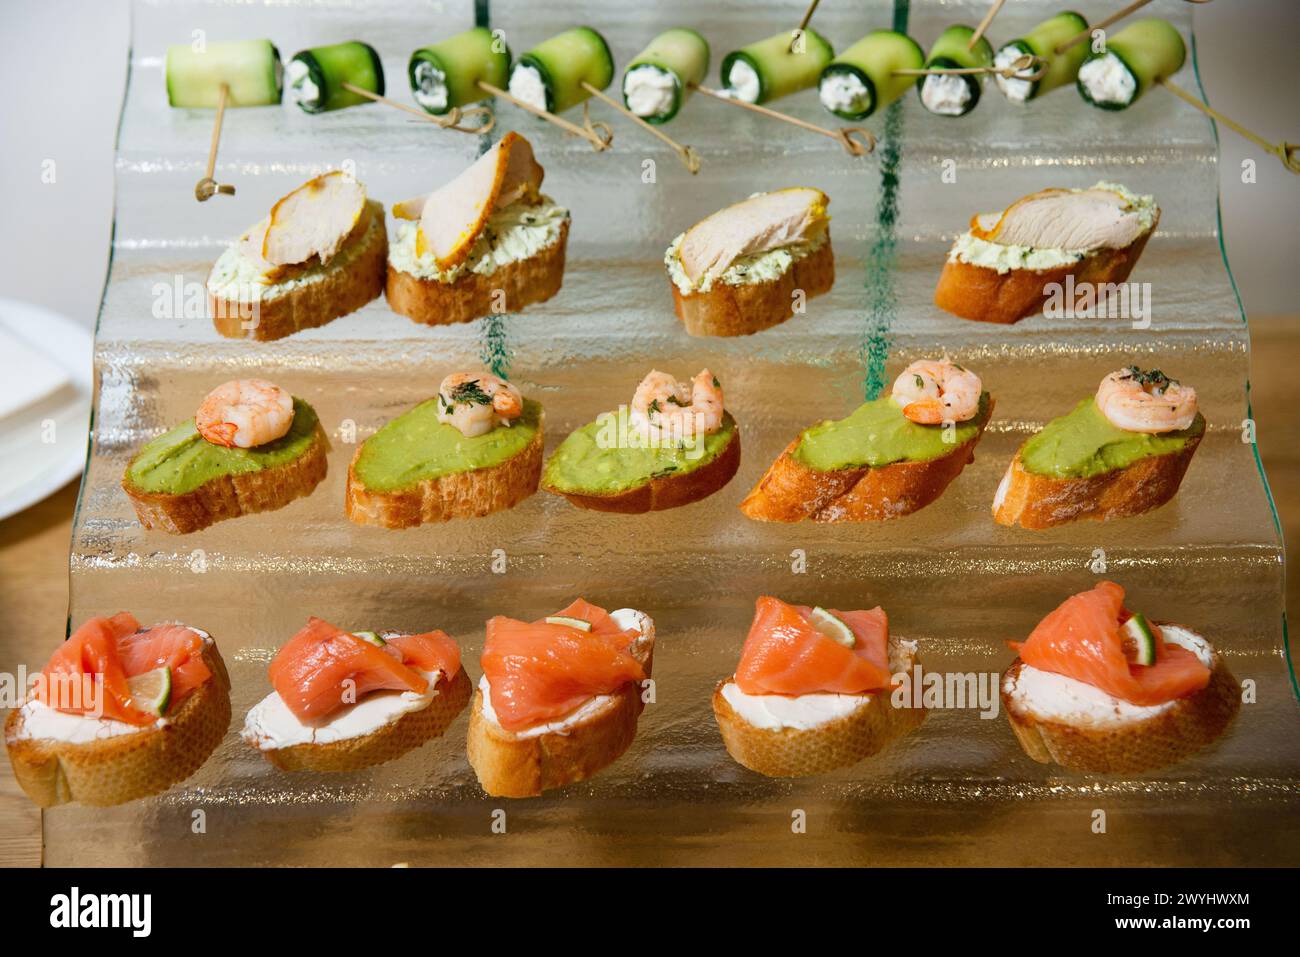 Elegant selection of canapés topped with smoked salmon, fresh avocado, and shrimp, perfect for high-end catering events or cocktail parties. Stock Photo